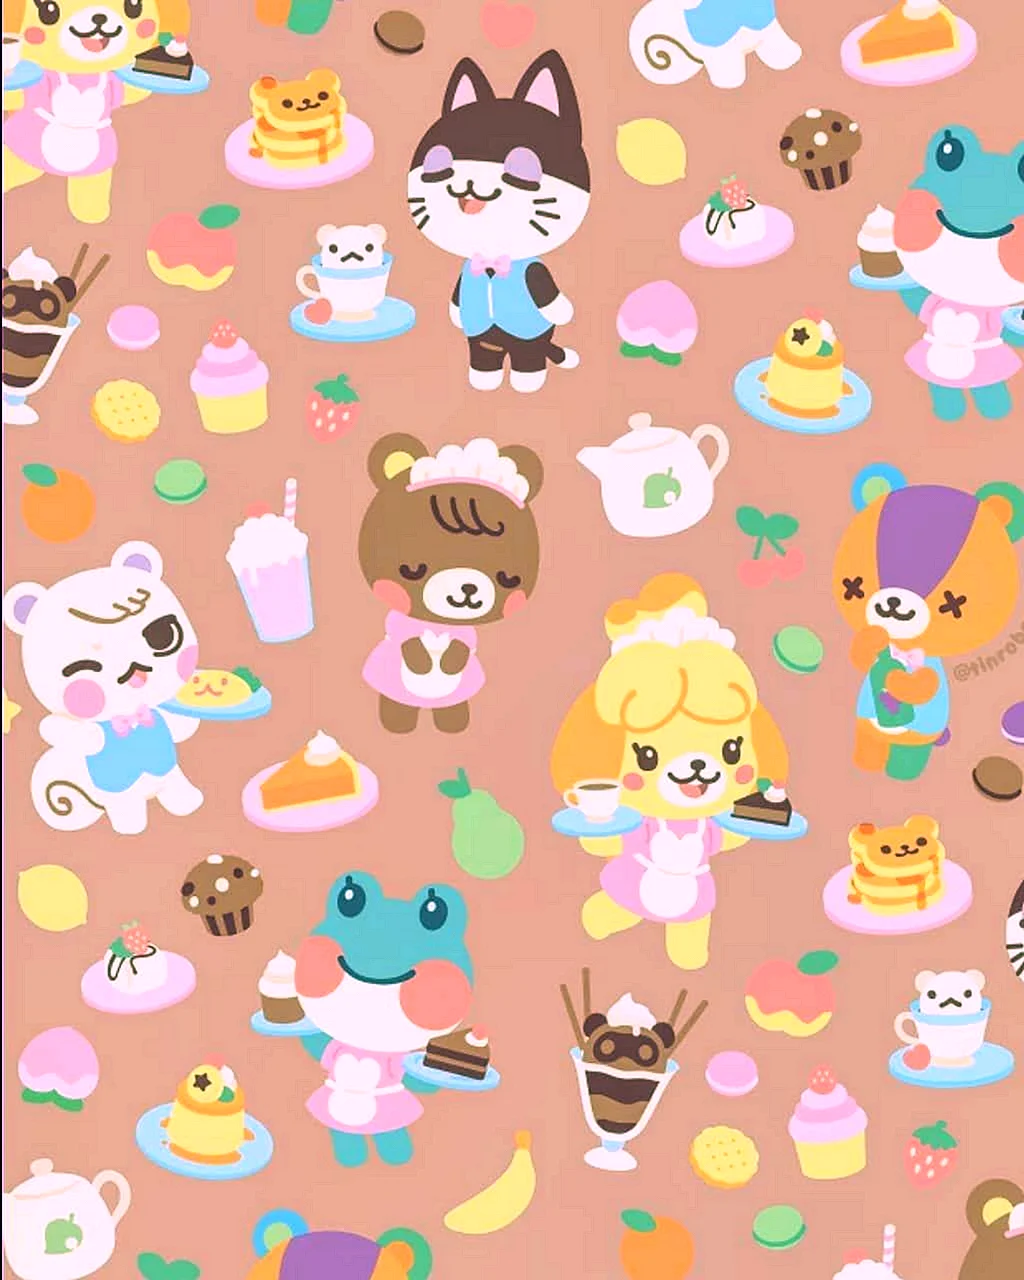 Animal Crossing Aesthetic Wallpaper For iPhone